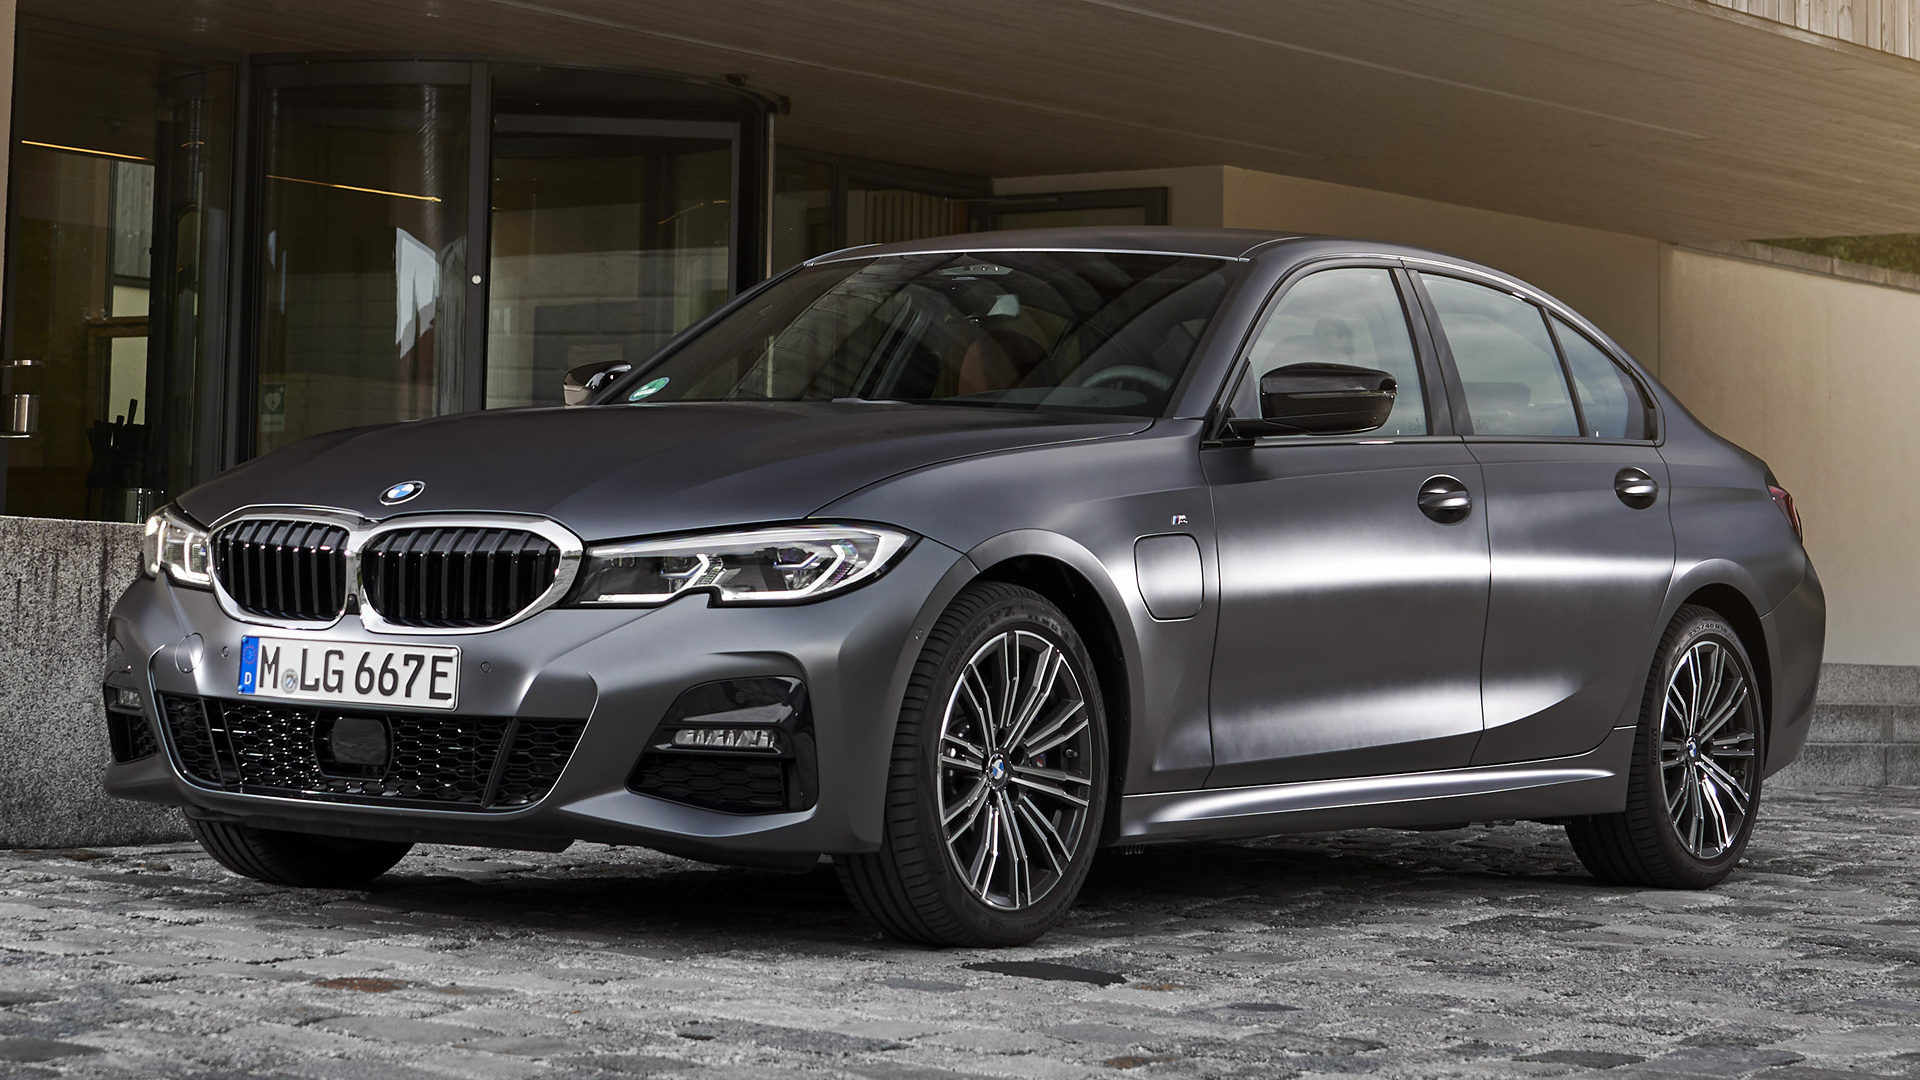 2019 3 Series Hybrid M Sport Wallpapers and HD Images | Car